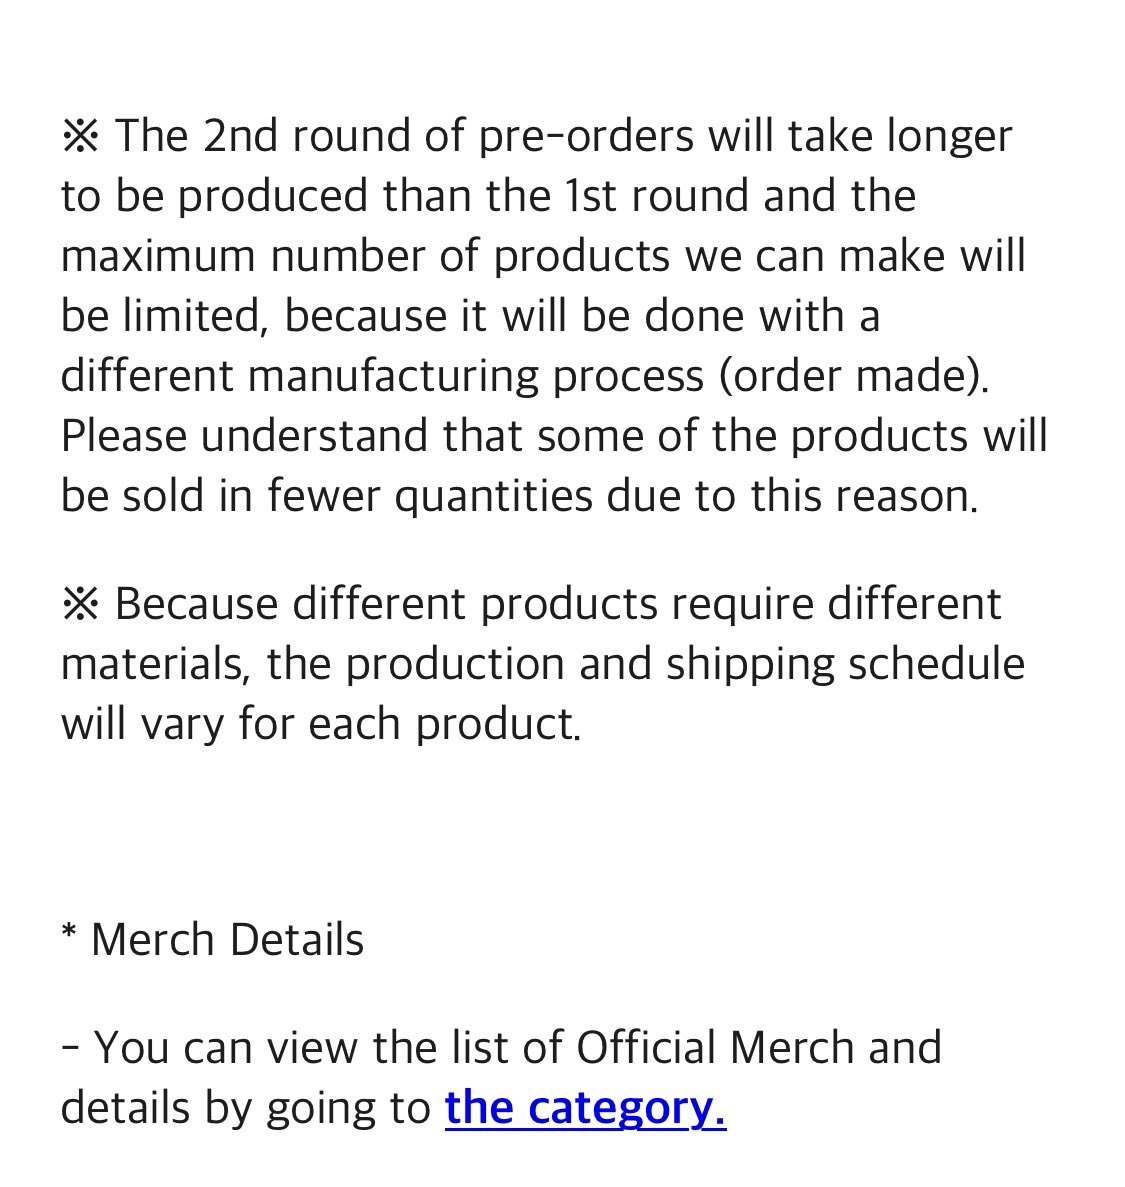 [Weverse Announcement] Due to popular demand, Weverse will open an additional round of pre-orders on Tue. January 25 for @BTS_twt Artist Merch 2nd round will take longer to be produced and will be limited (different manufacturing process)